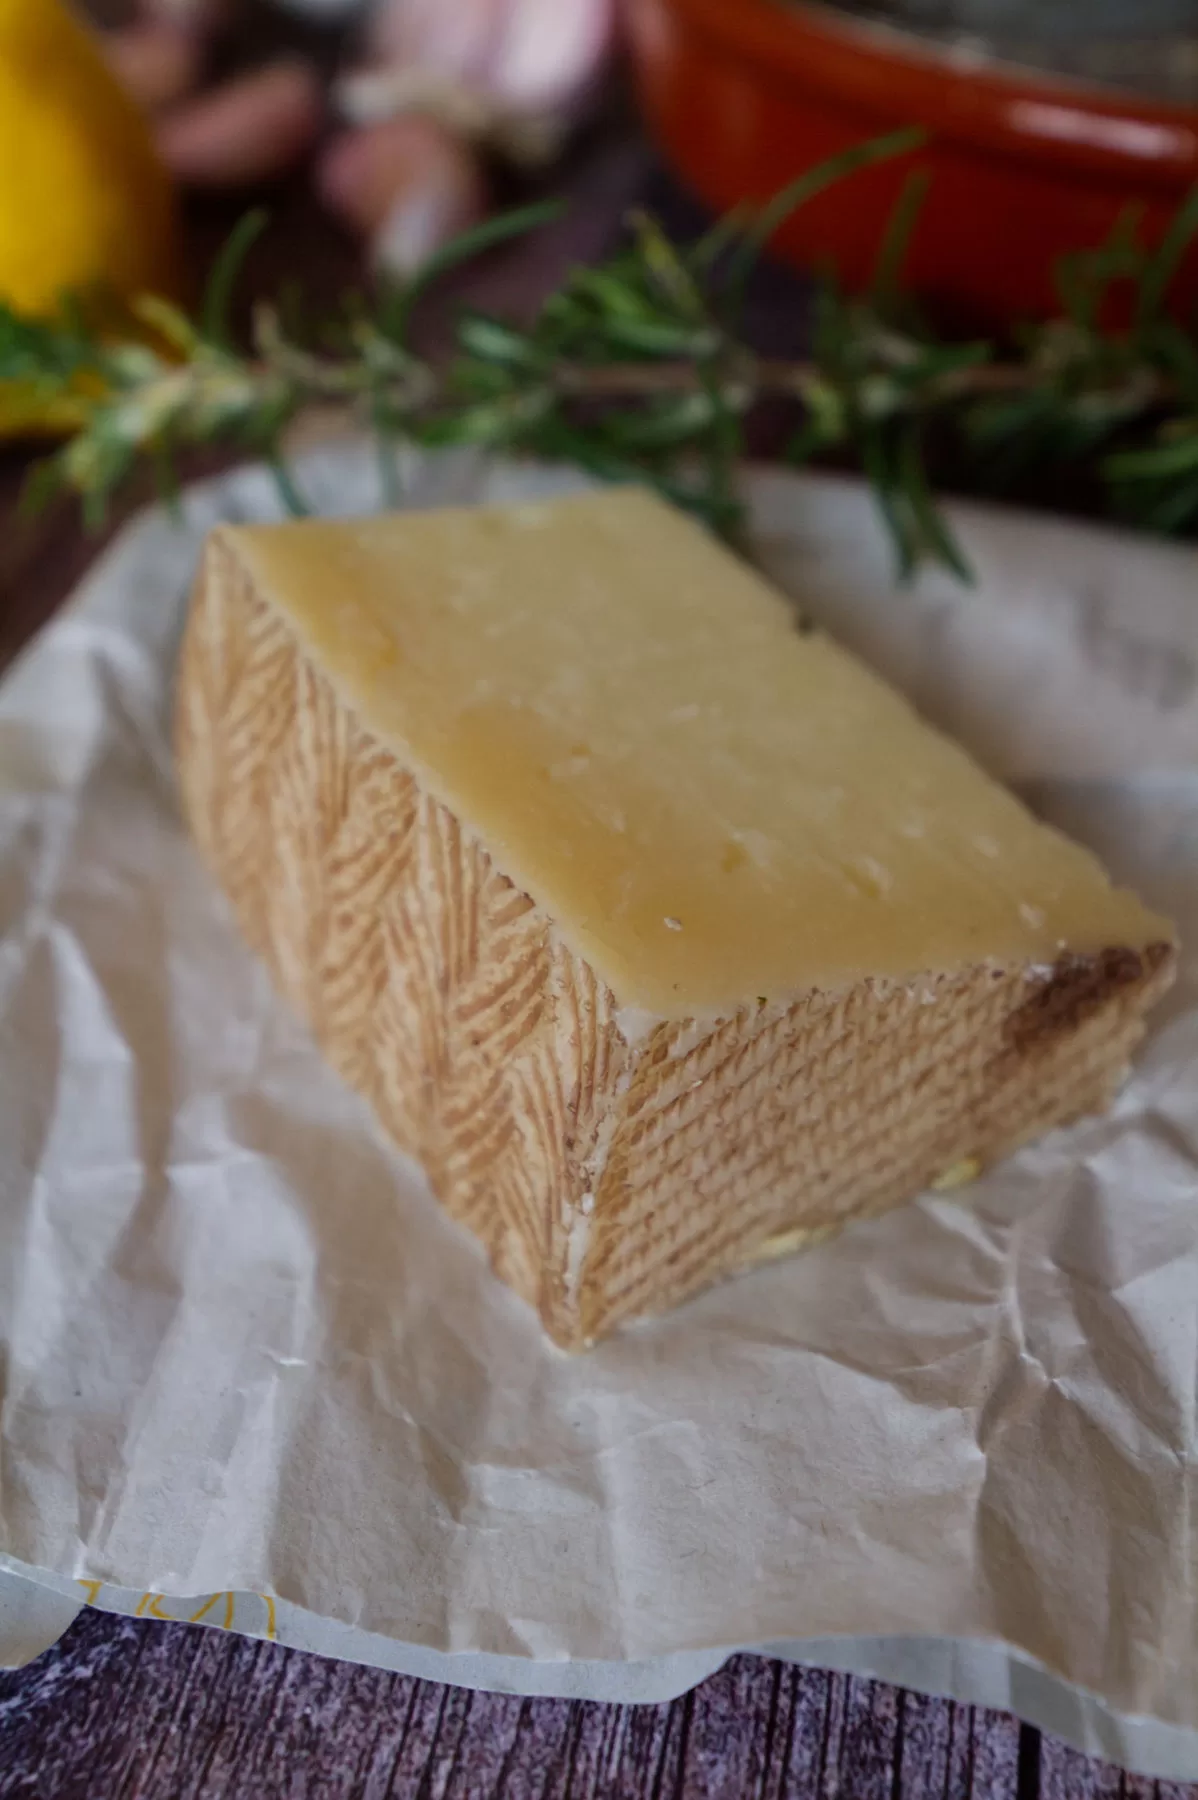 A wedge of Manchego cheese with its distinctive brown wax rind. 